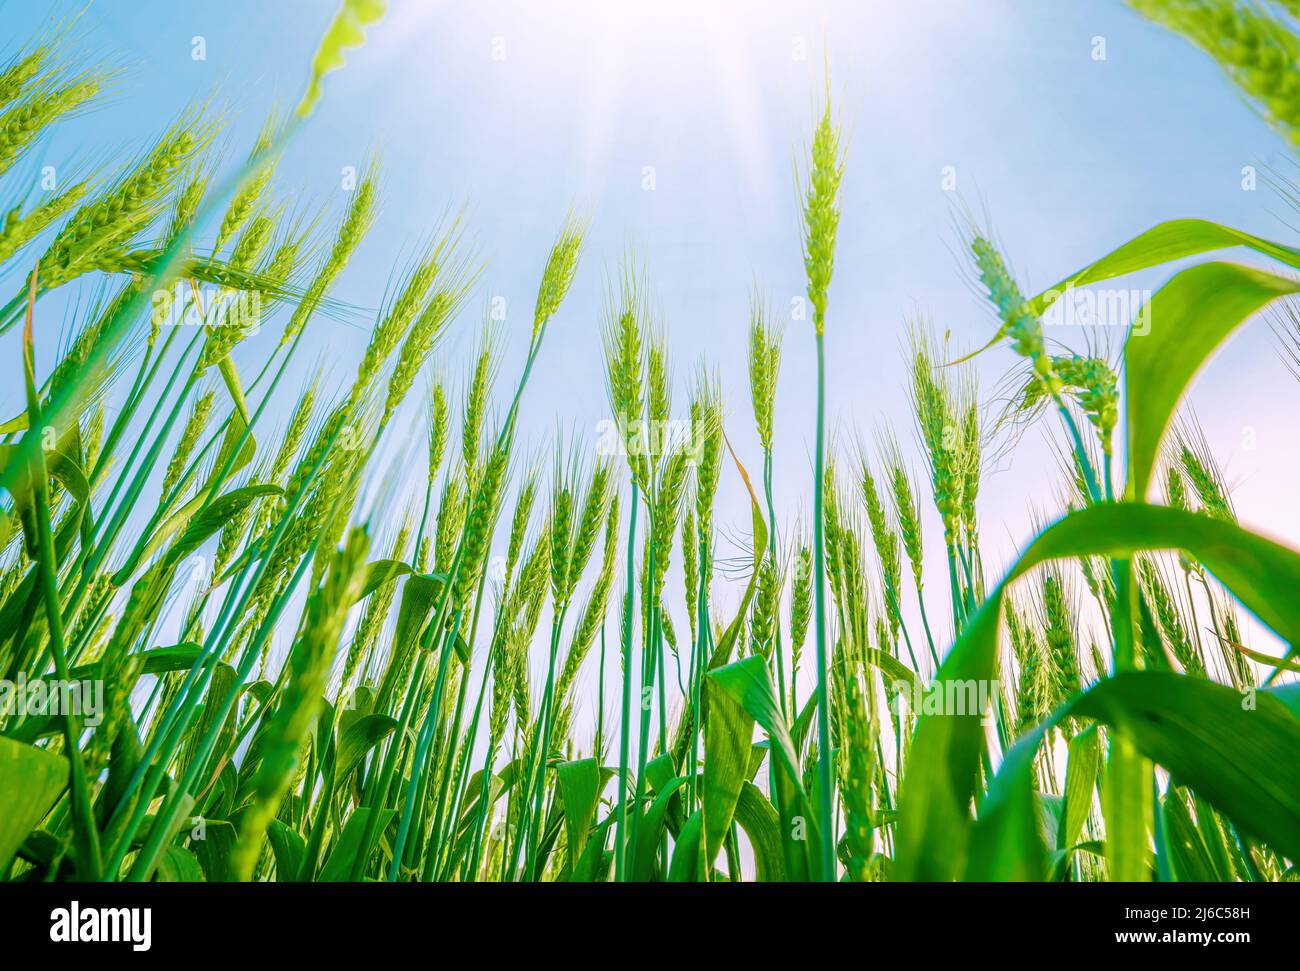 Green wheat plants against blue sky with sunlight, dramatic low angle view perspective Stock Photo